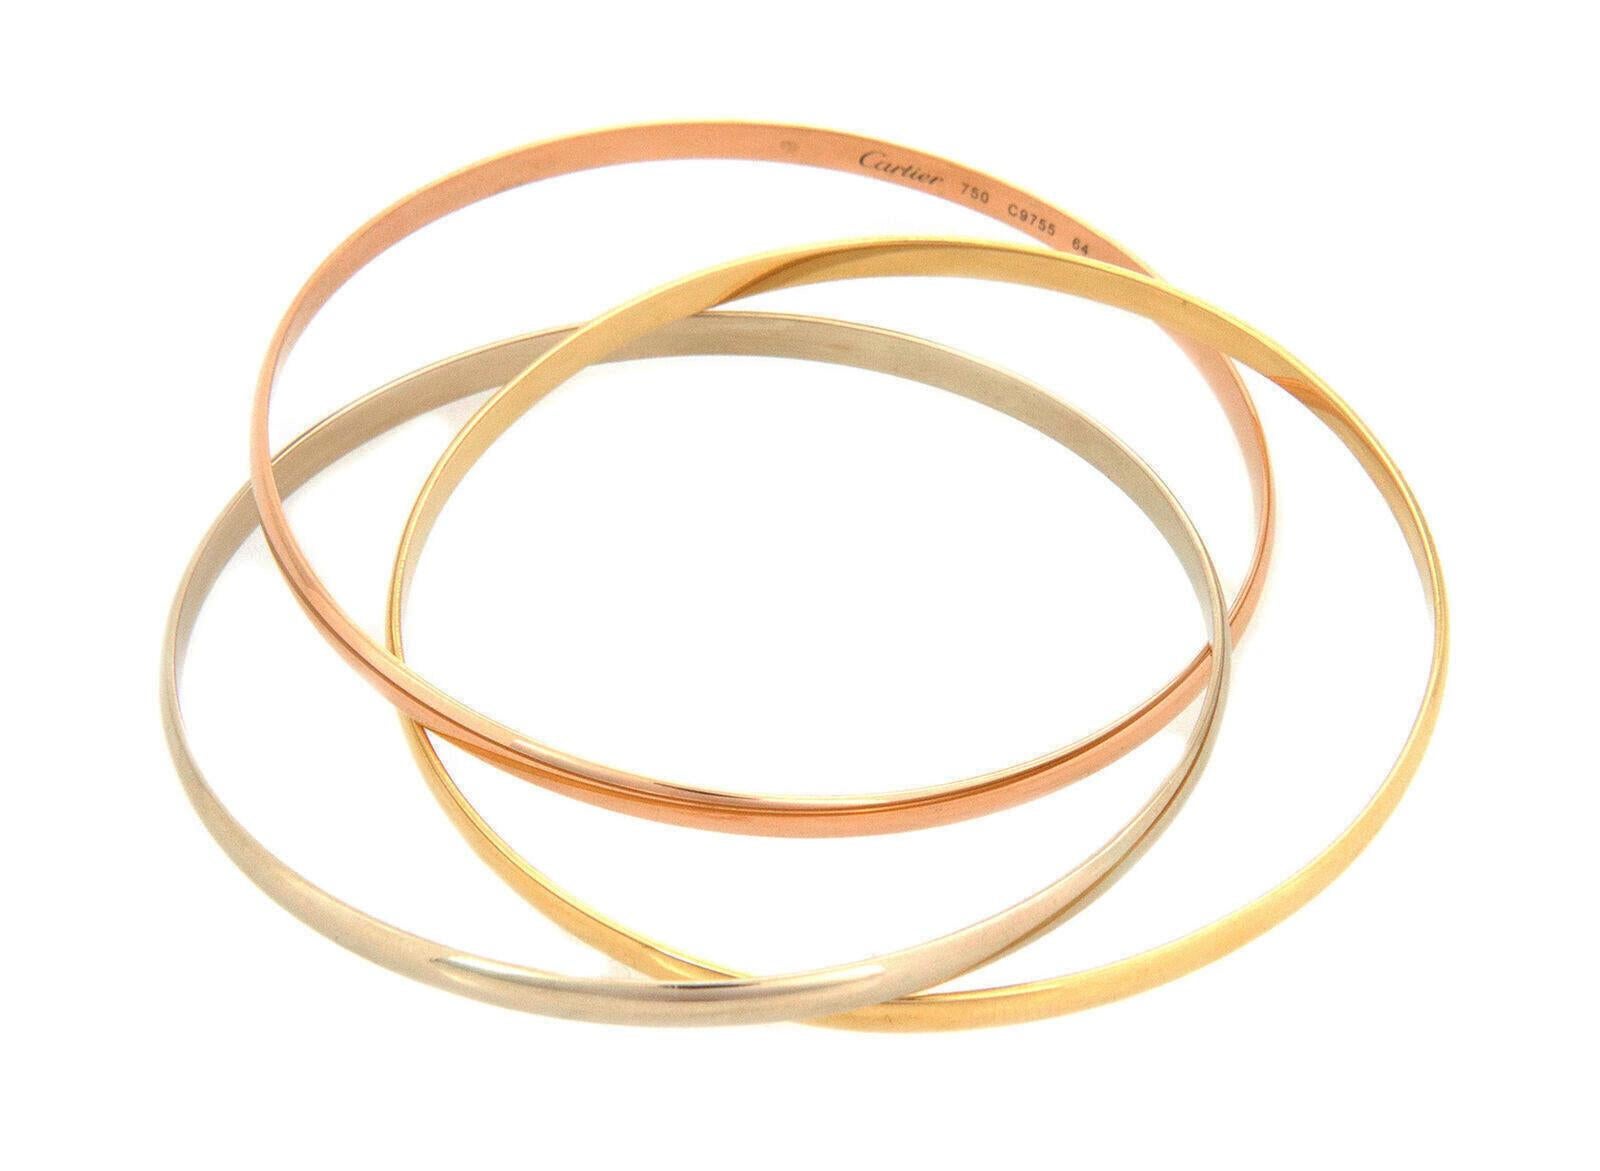 These gorgeous authentic triple interlaced bangles are by Cartier from the Trinity Collection. They are crafted from 18k pink, white and yellow gold respectively in a fine polished finish.  Each bangle is 3.5mm wide with a dome shape. They are set